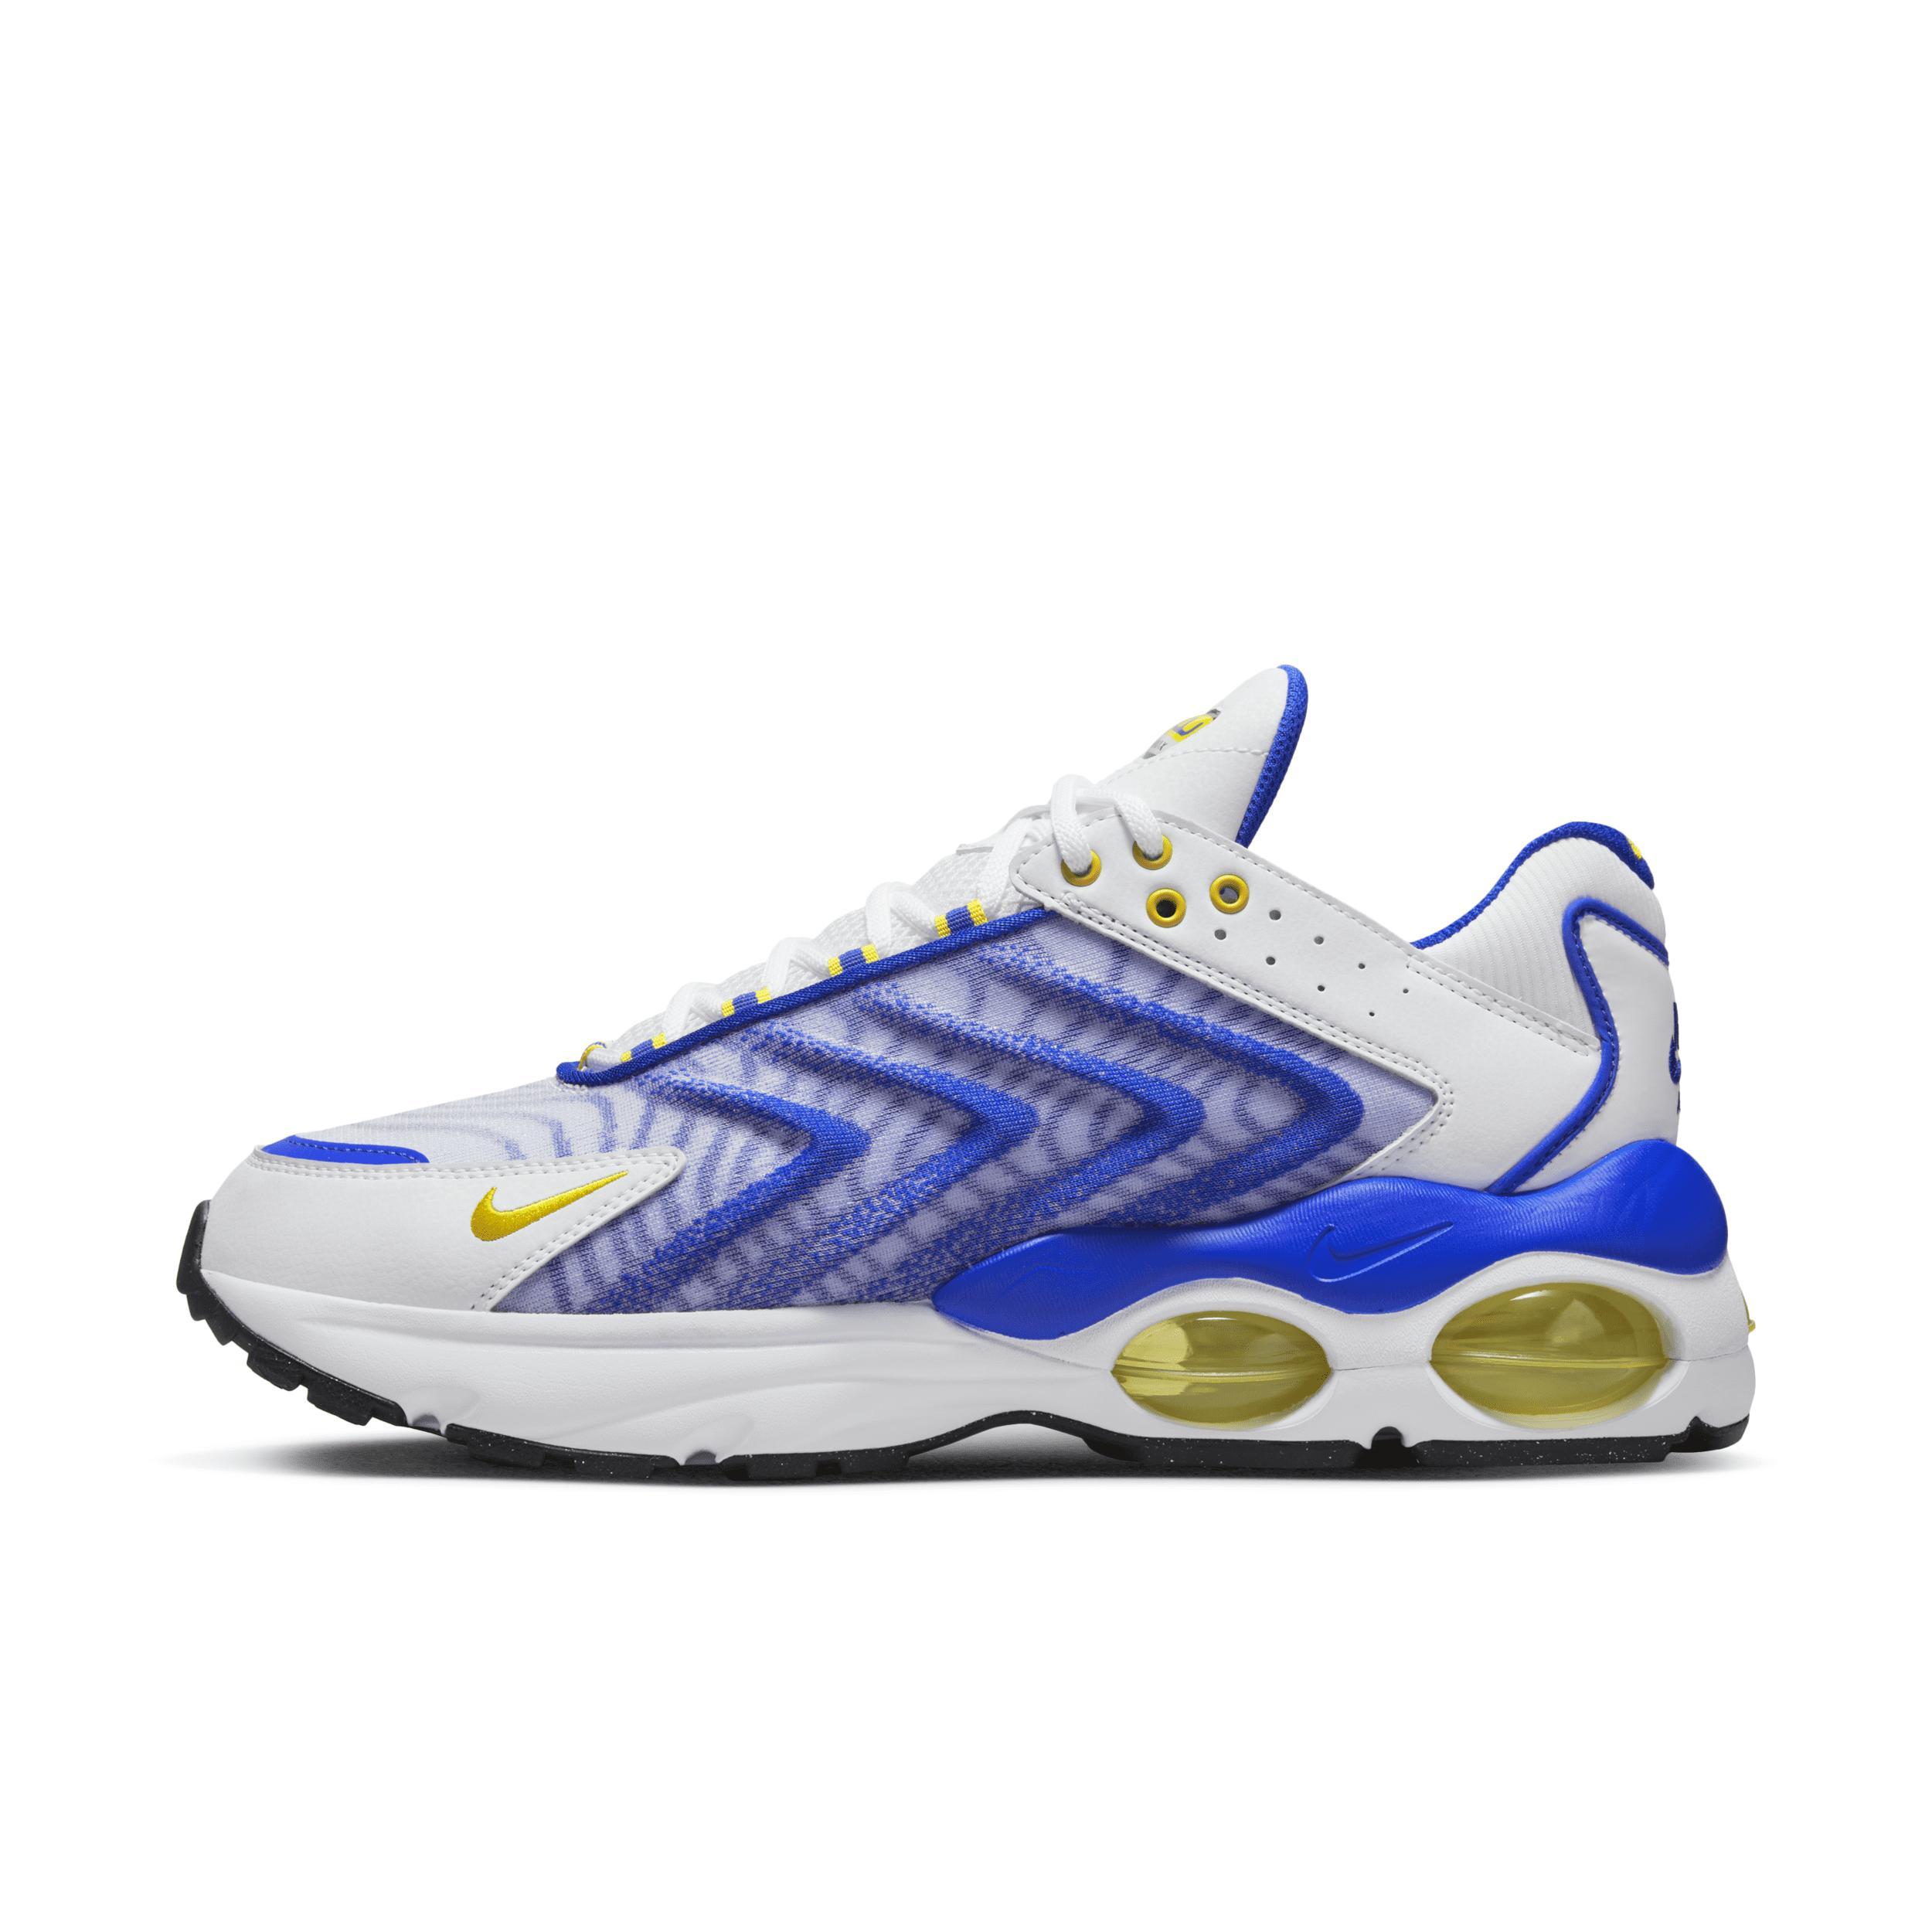 Nike Men's Air Max TW Shoes Product Image